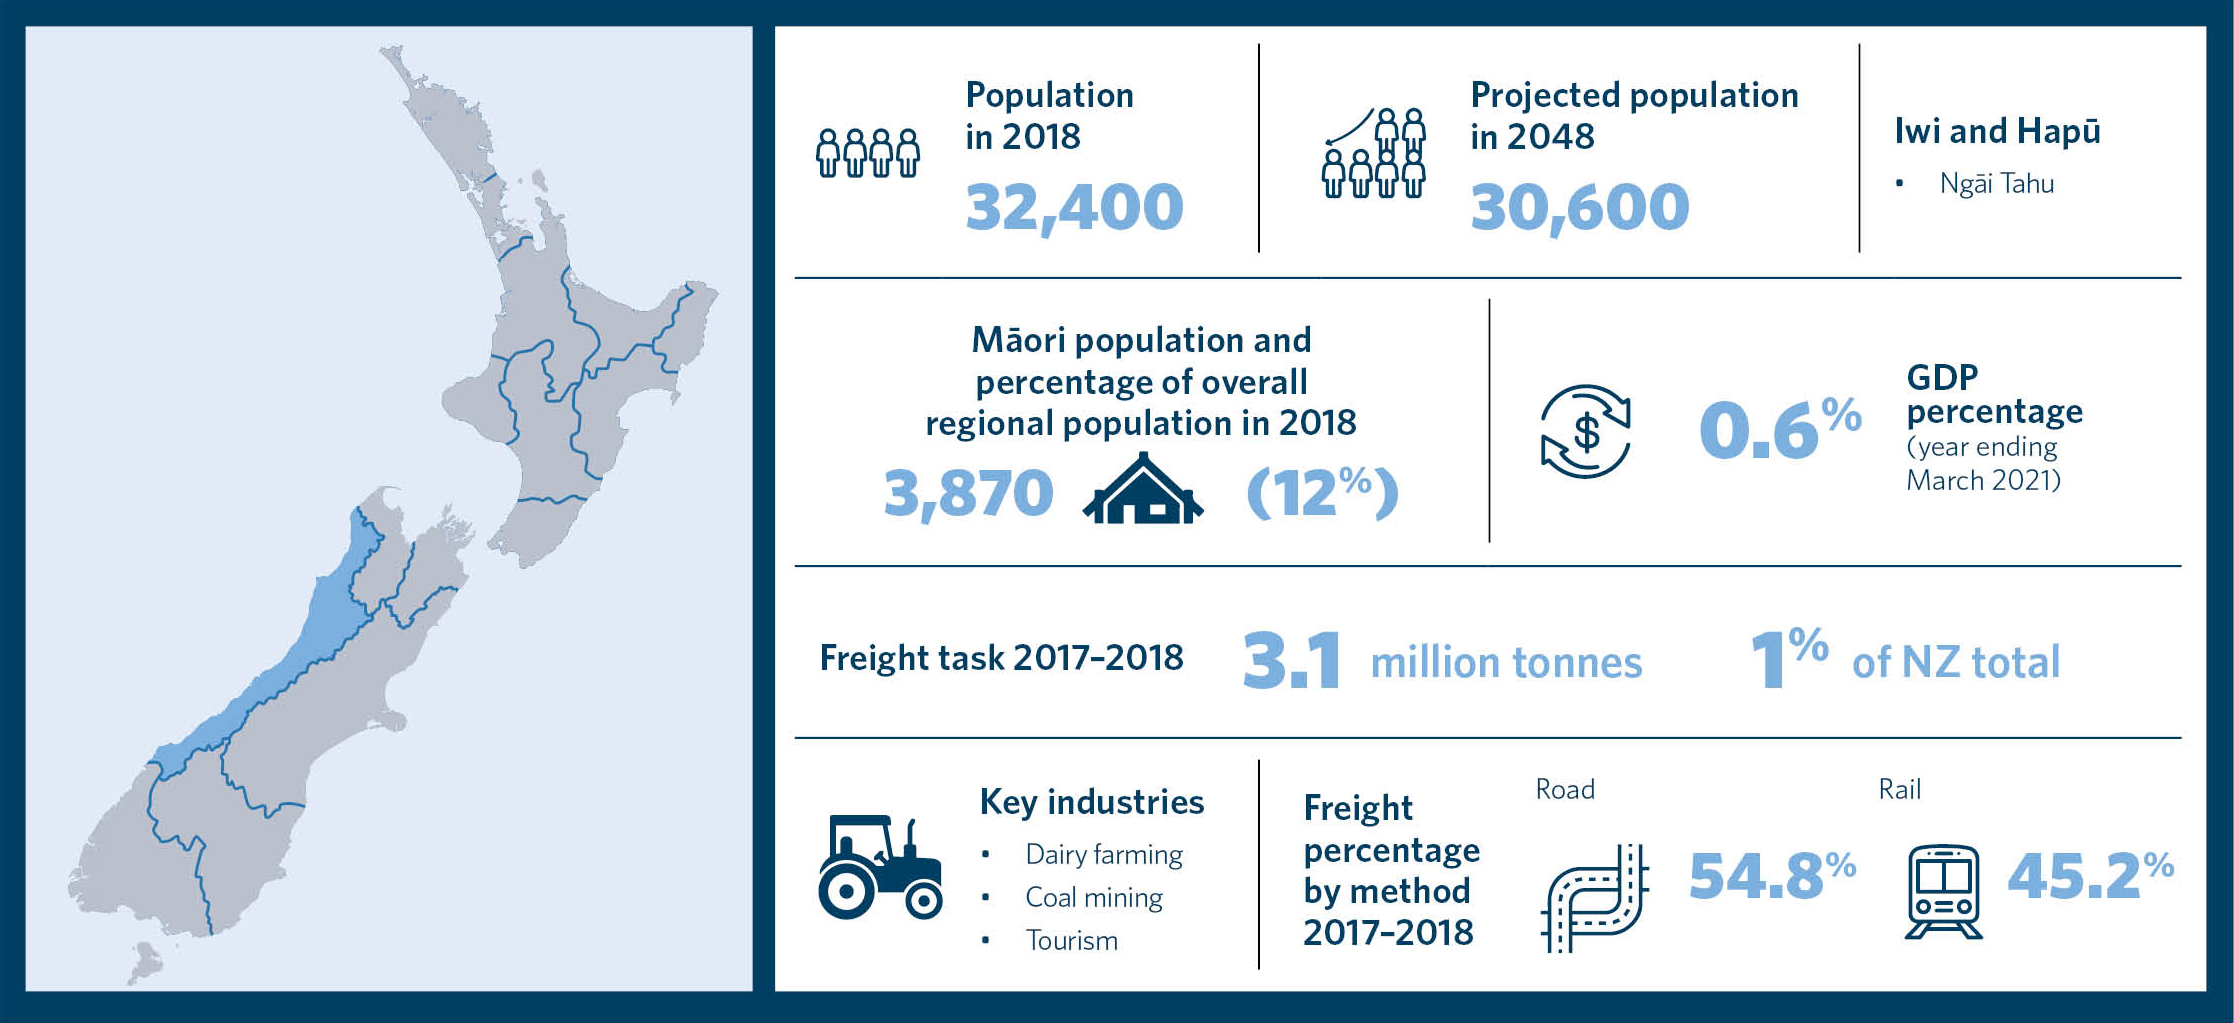 This is an infographic showing statistics for the region of Te Tai o Poutini West Coast. It includes information about the population in 2018, projected population in 2048, Māori population and percentage of overall regional population in 2018, a list of 